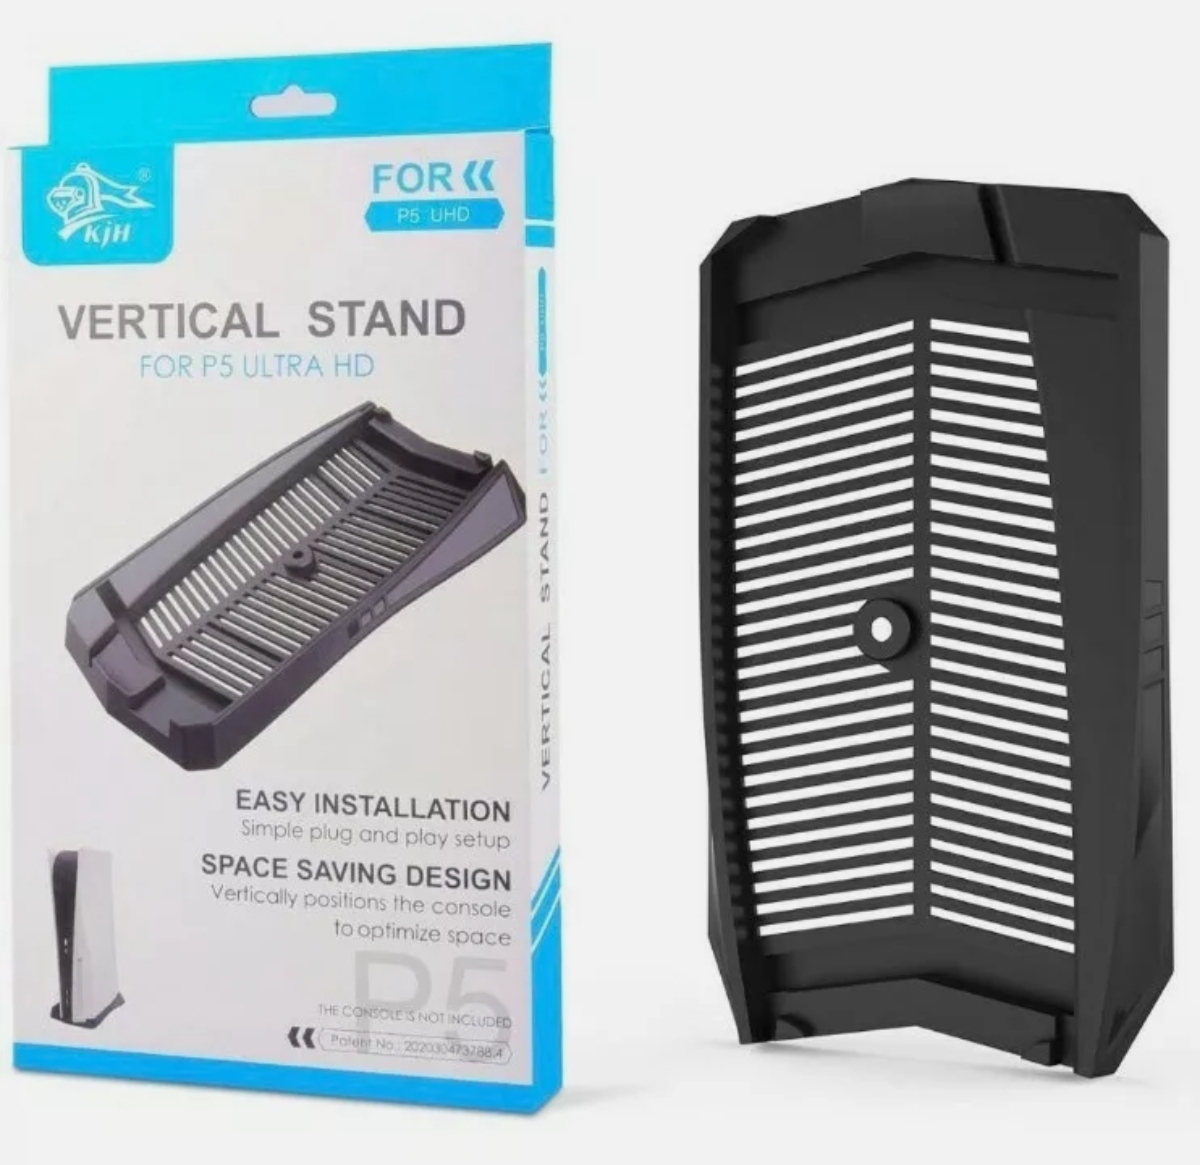 PS5 PlayStation 5 Vertical Stand Mount for Digital Edition Consoles.